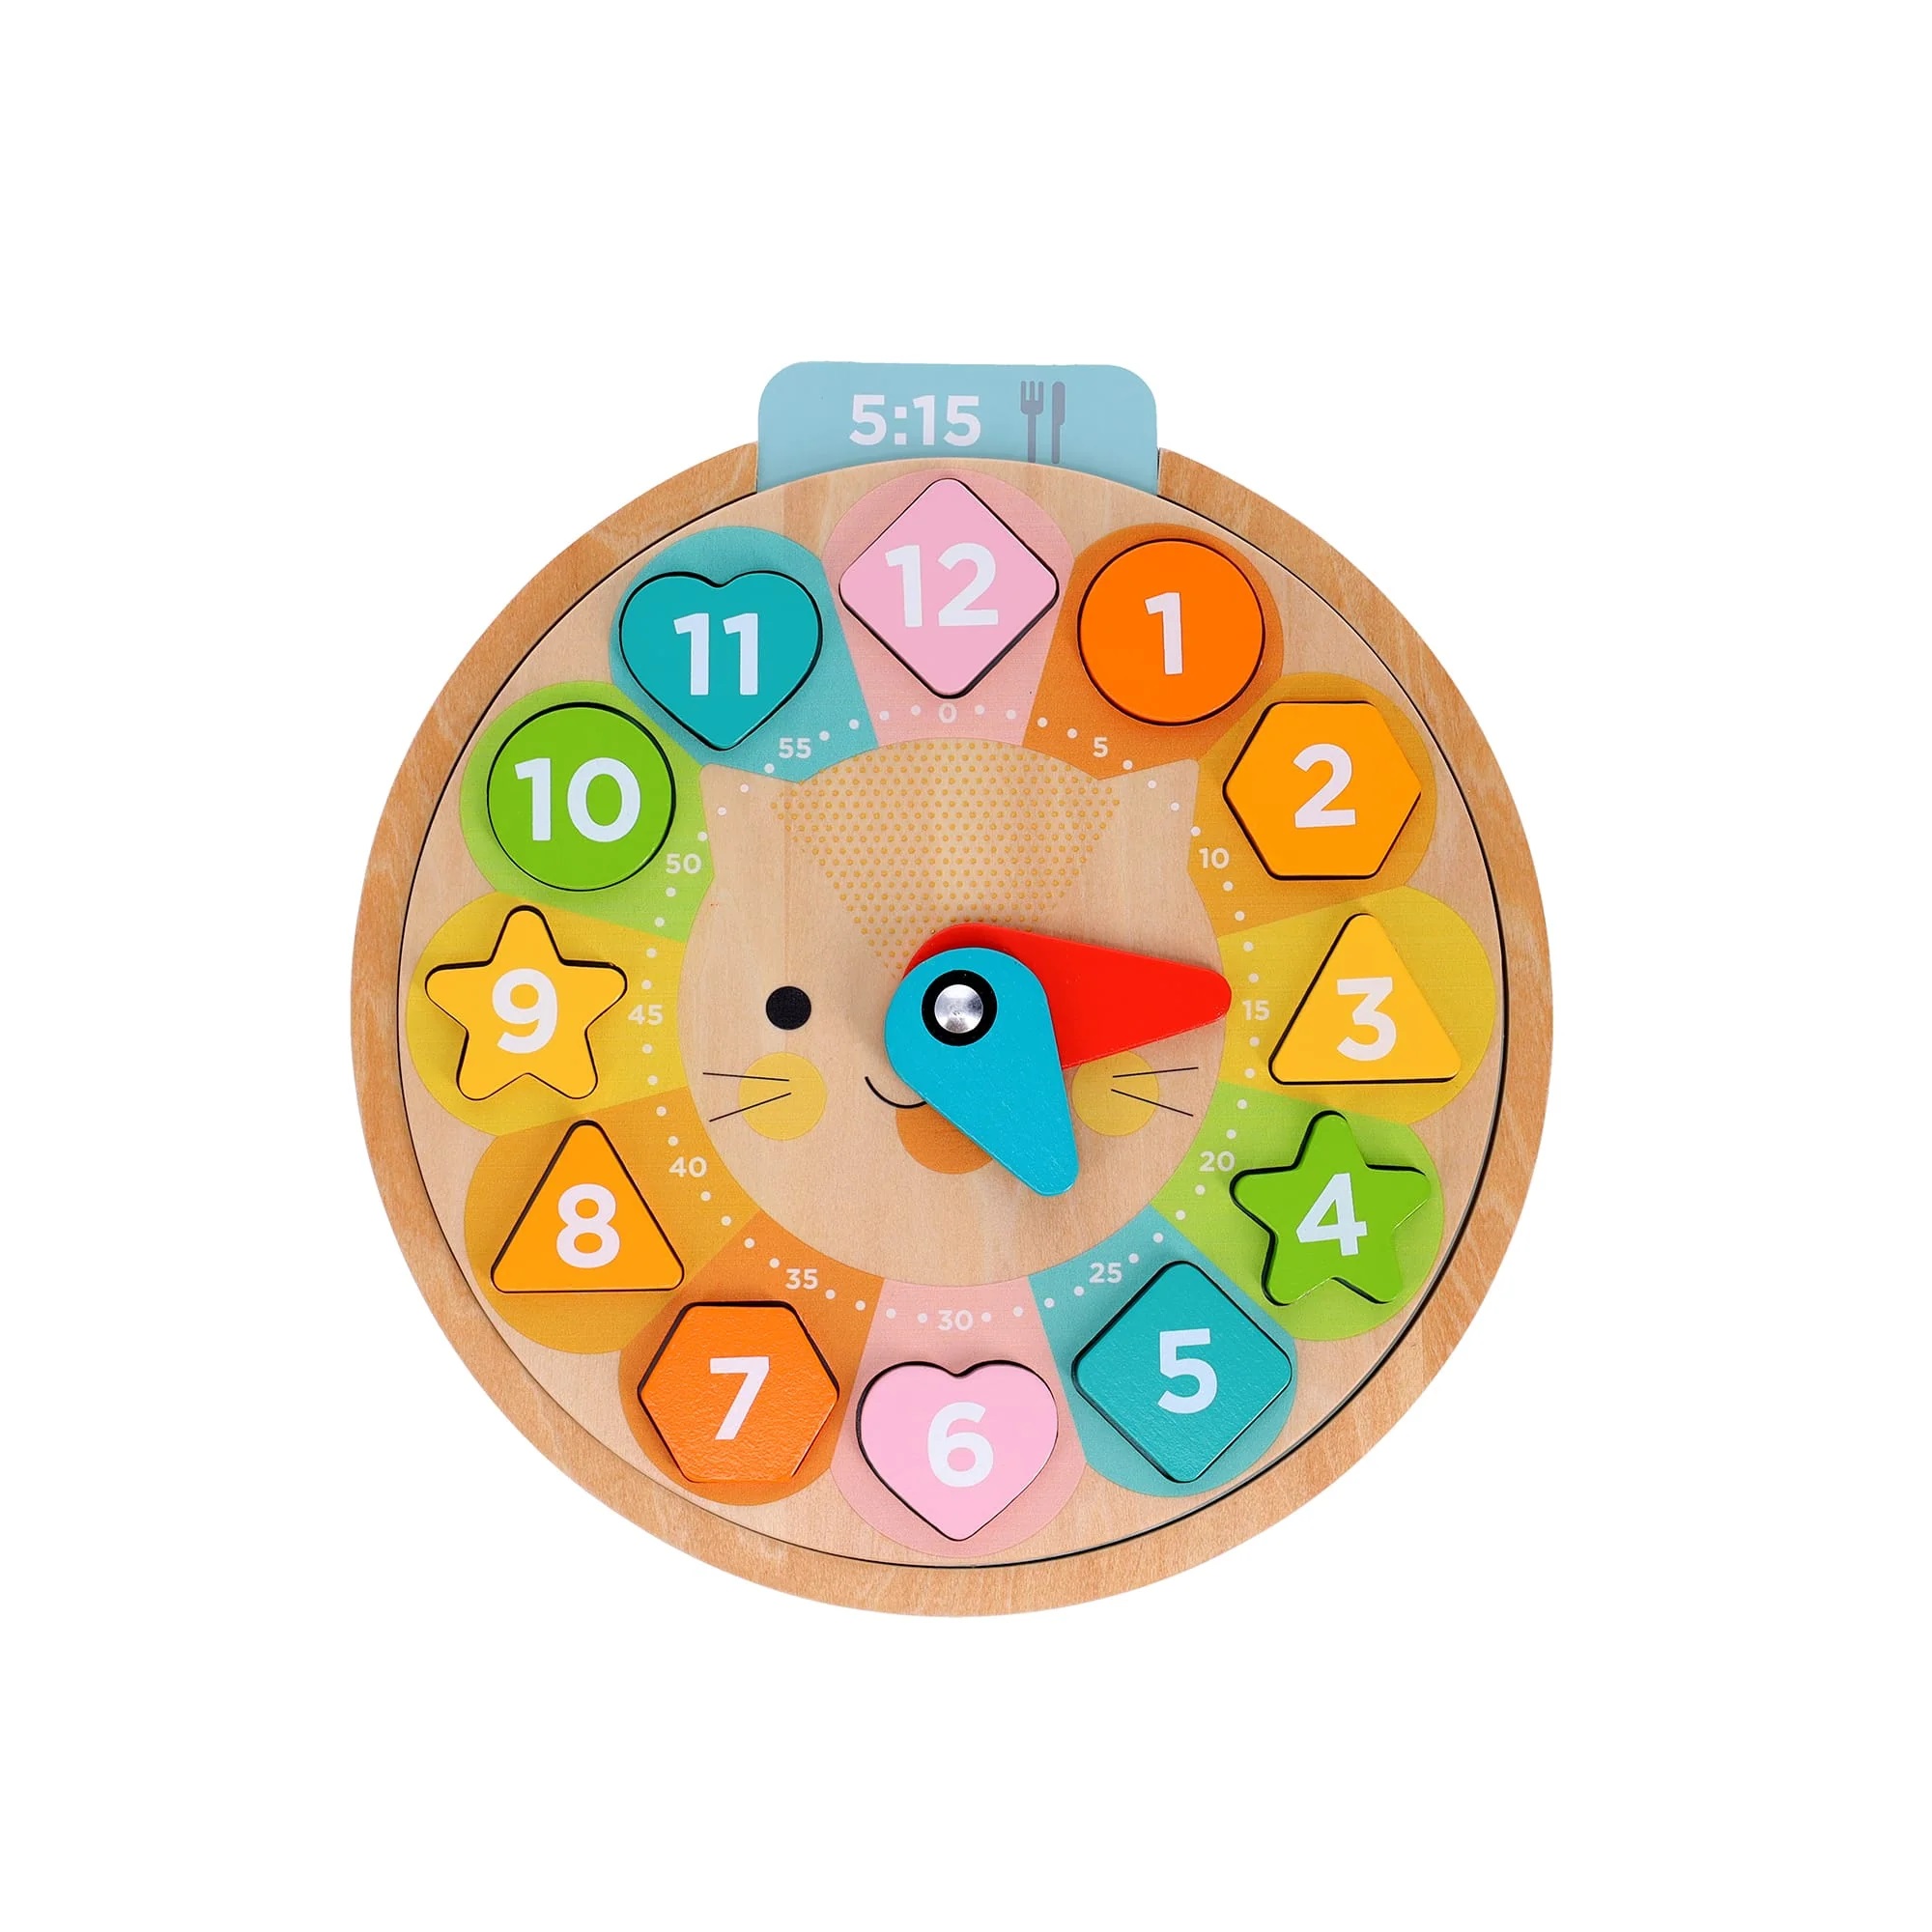 Wooden Learning Clock - Multi-Language, Counting,Colors 3